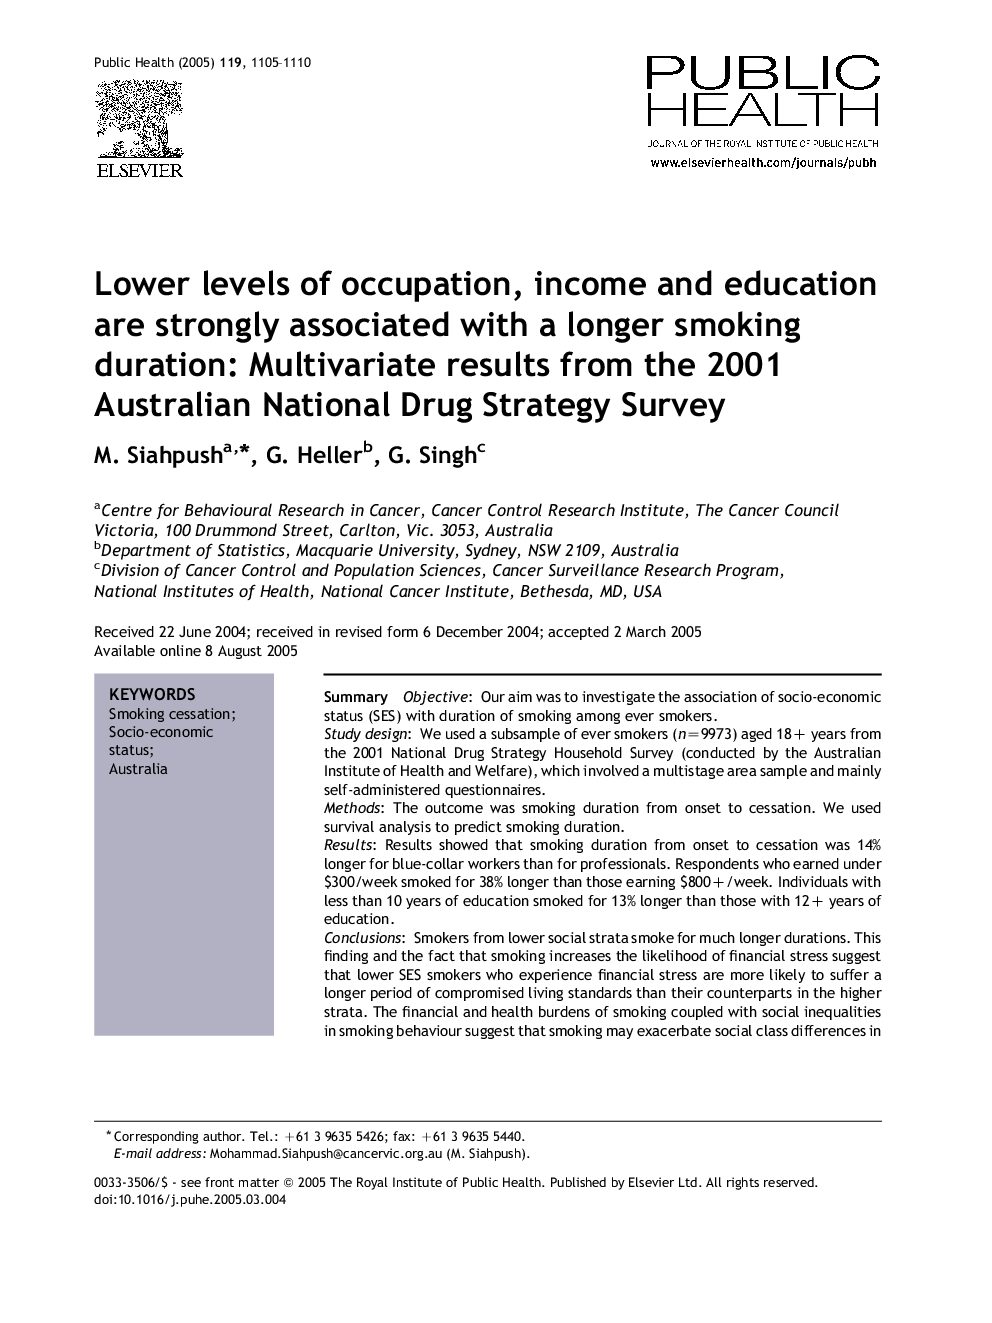 Lower levels of occupation, income and education are strongly associated with a longer smoking duration: Multivariate results from the 2001 Australian National Drug Strategy Survey